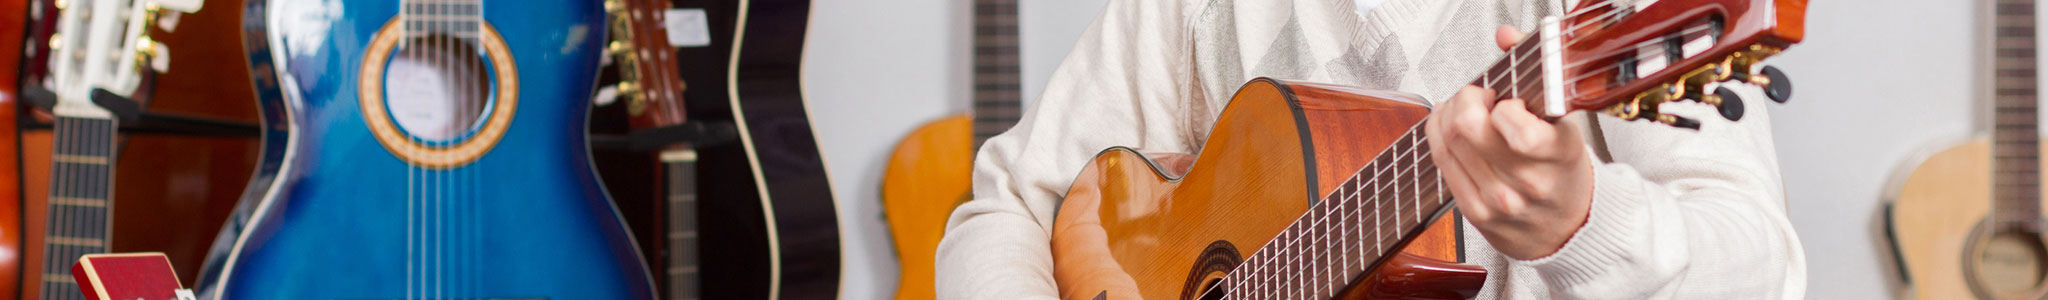 Man playing acoustic guitar in music shop